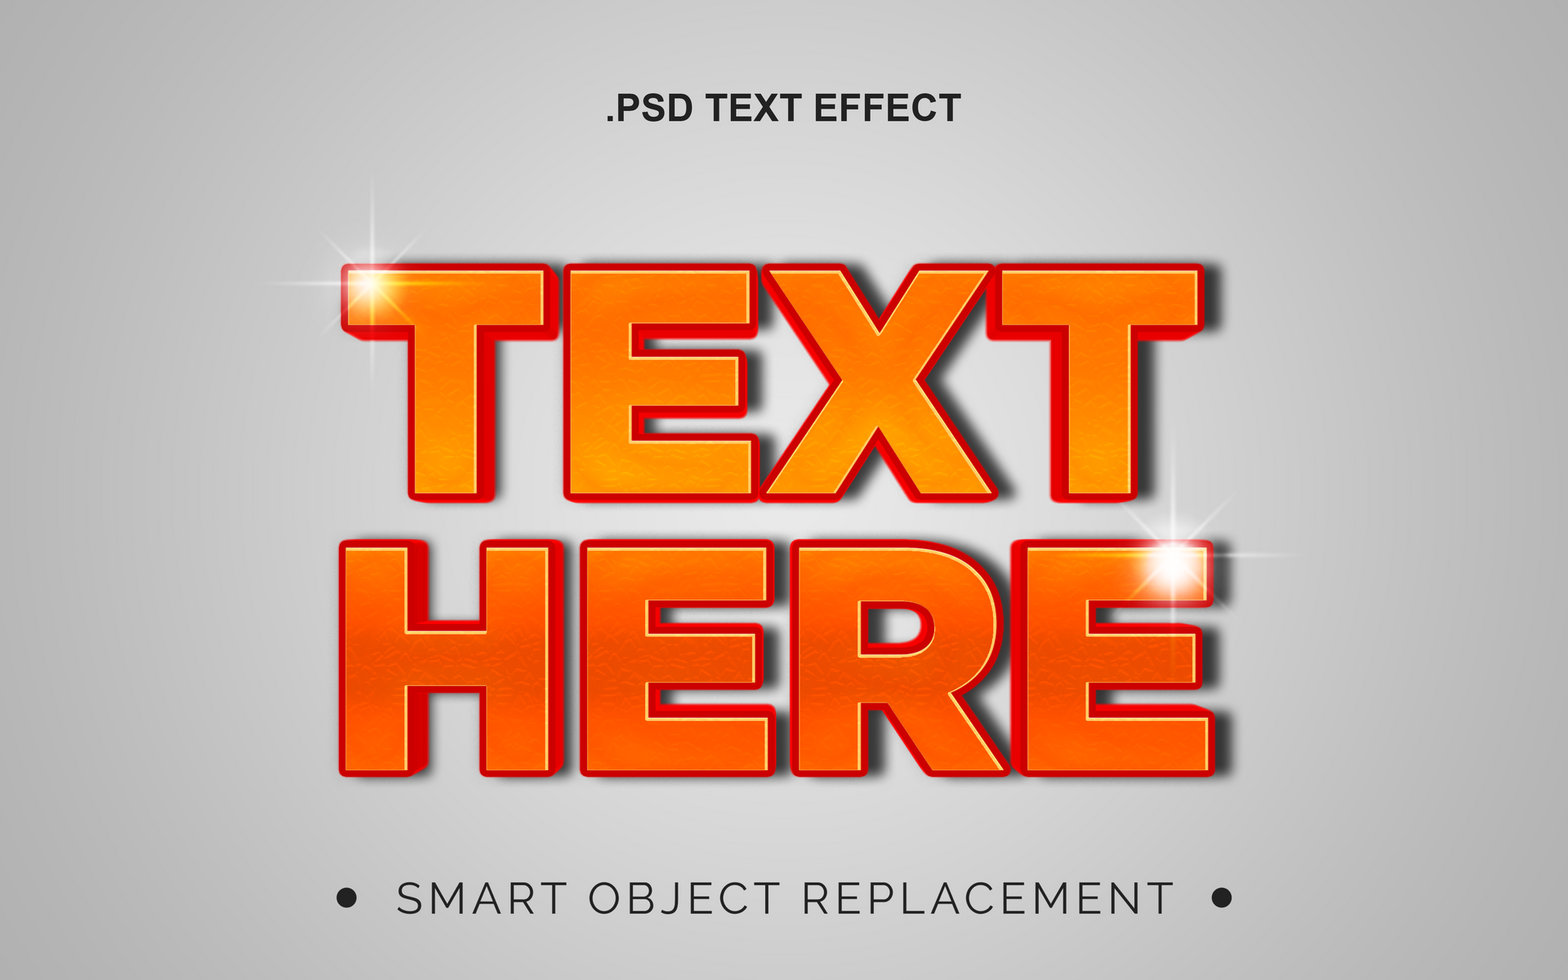 3D Realistic Glossy Shinning Text Effect psd